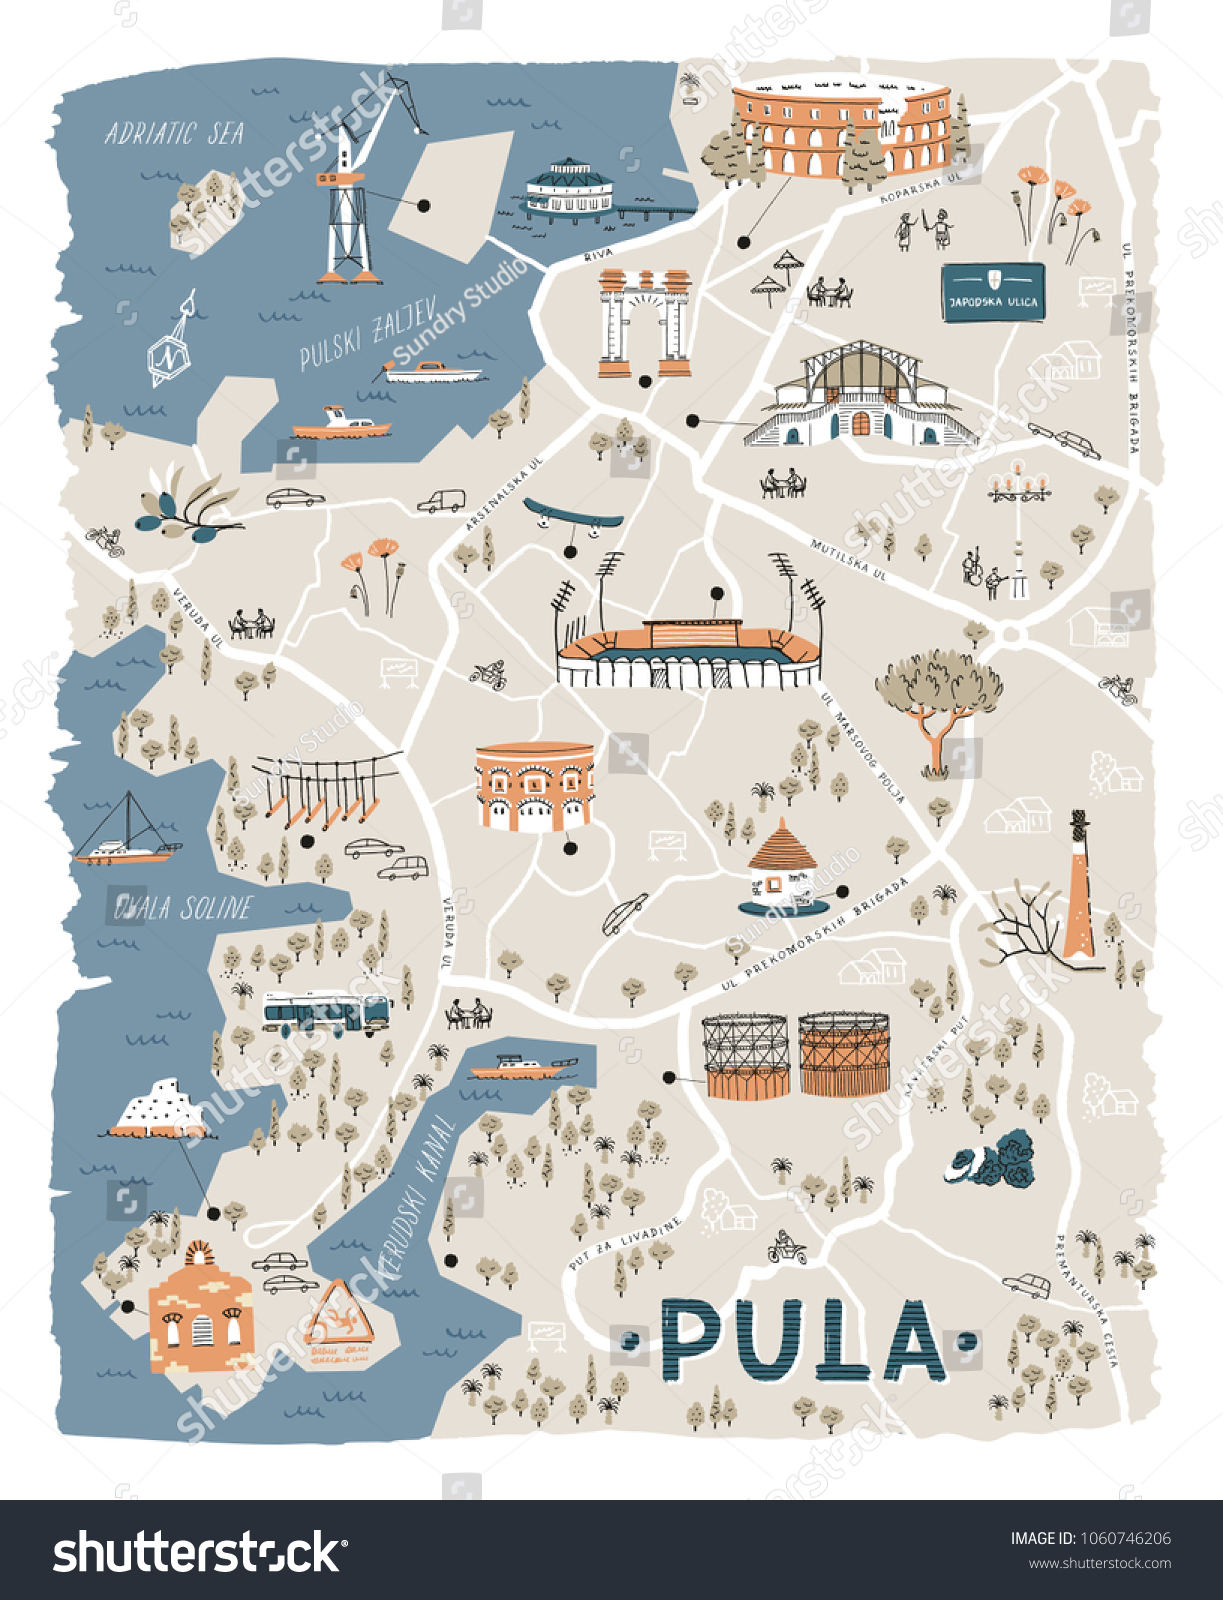 Stock Vector Detailed Illustrated Map Of Pula Croatia Includes Main Touristic Attractions And Famous Local 1060746206 